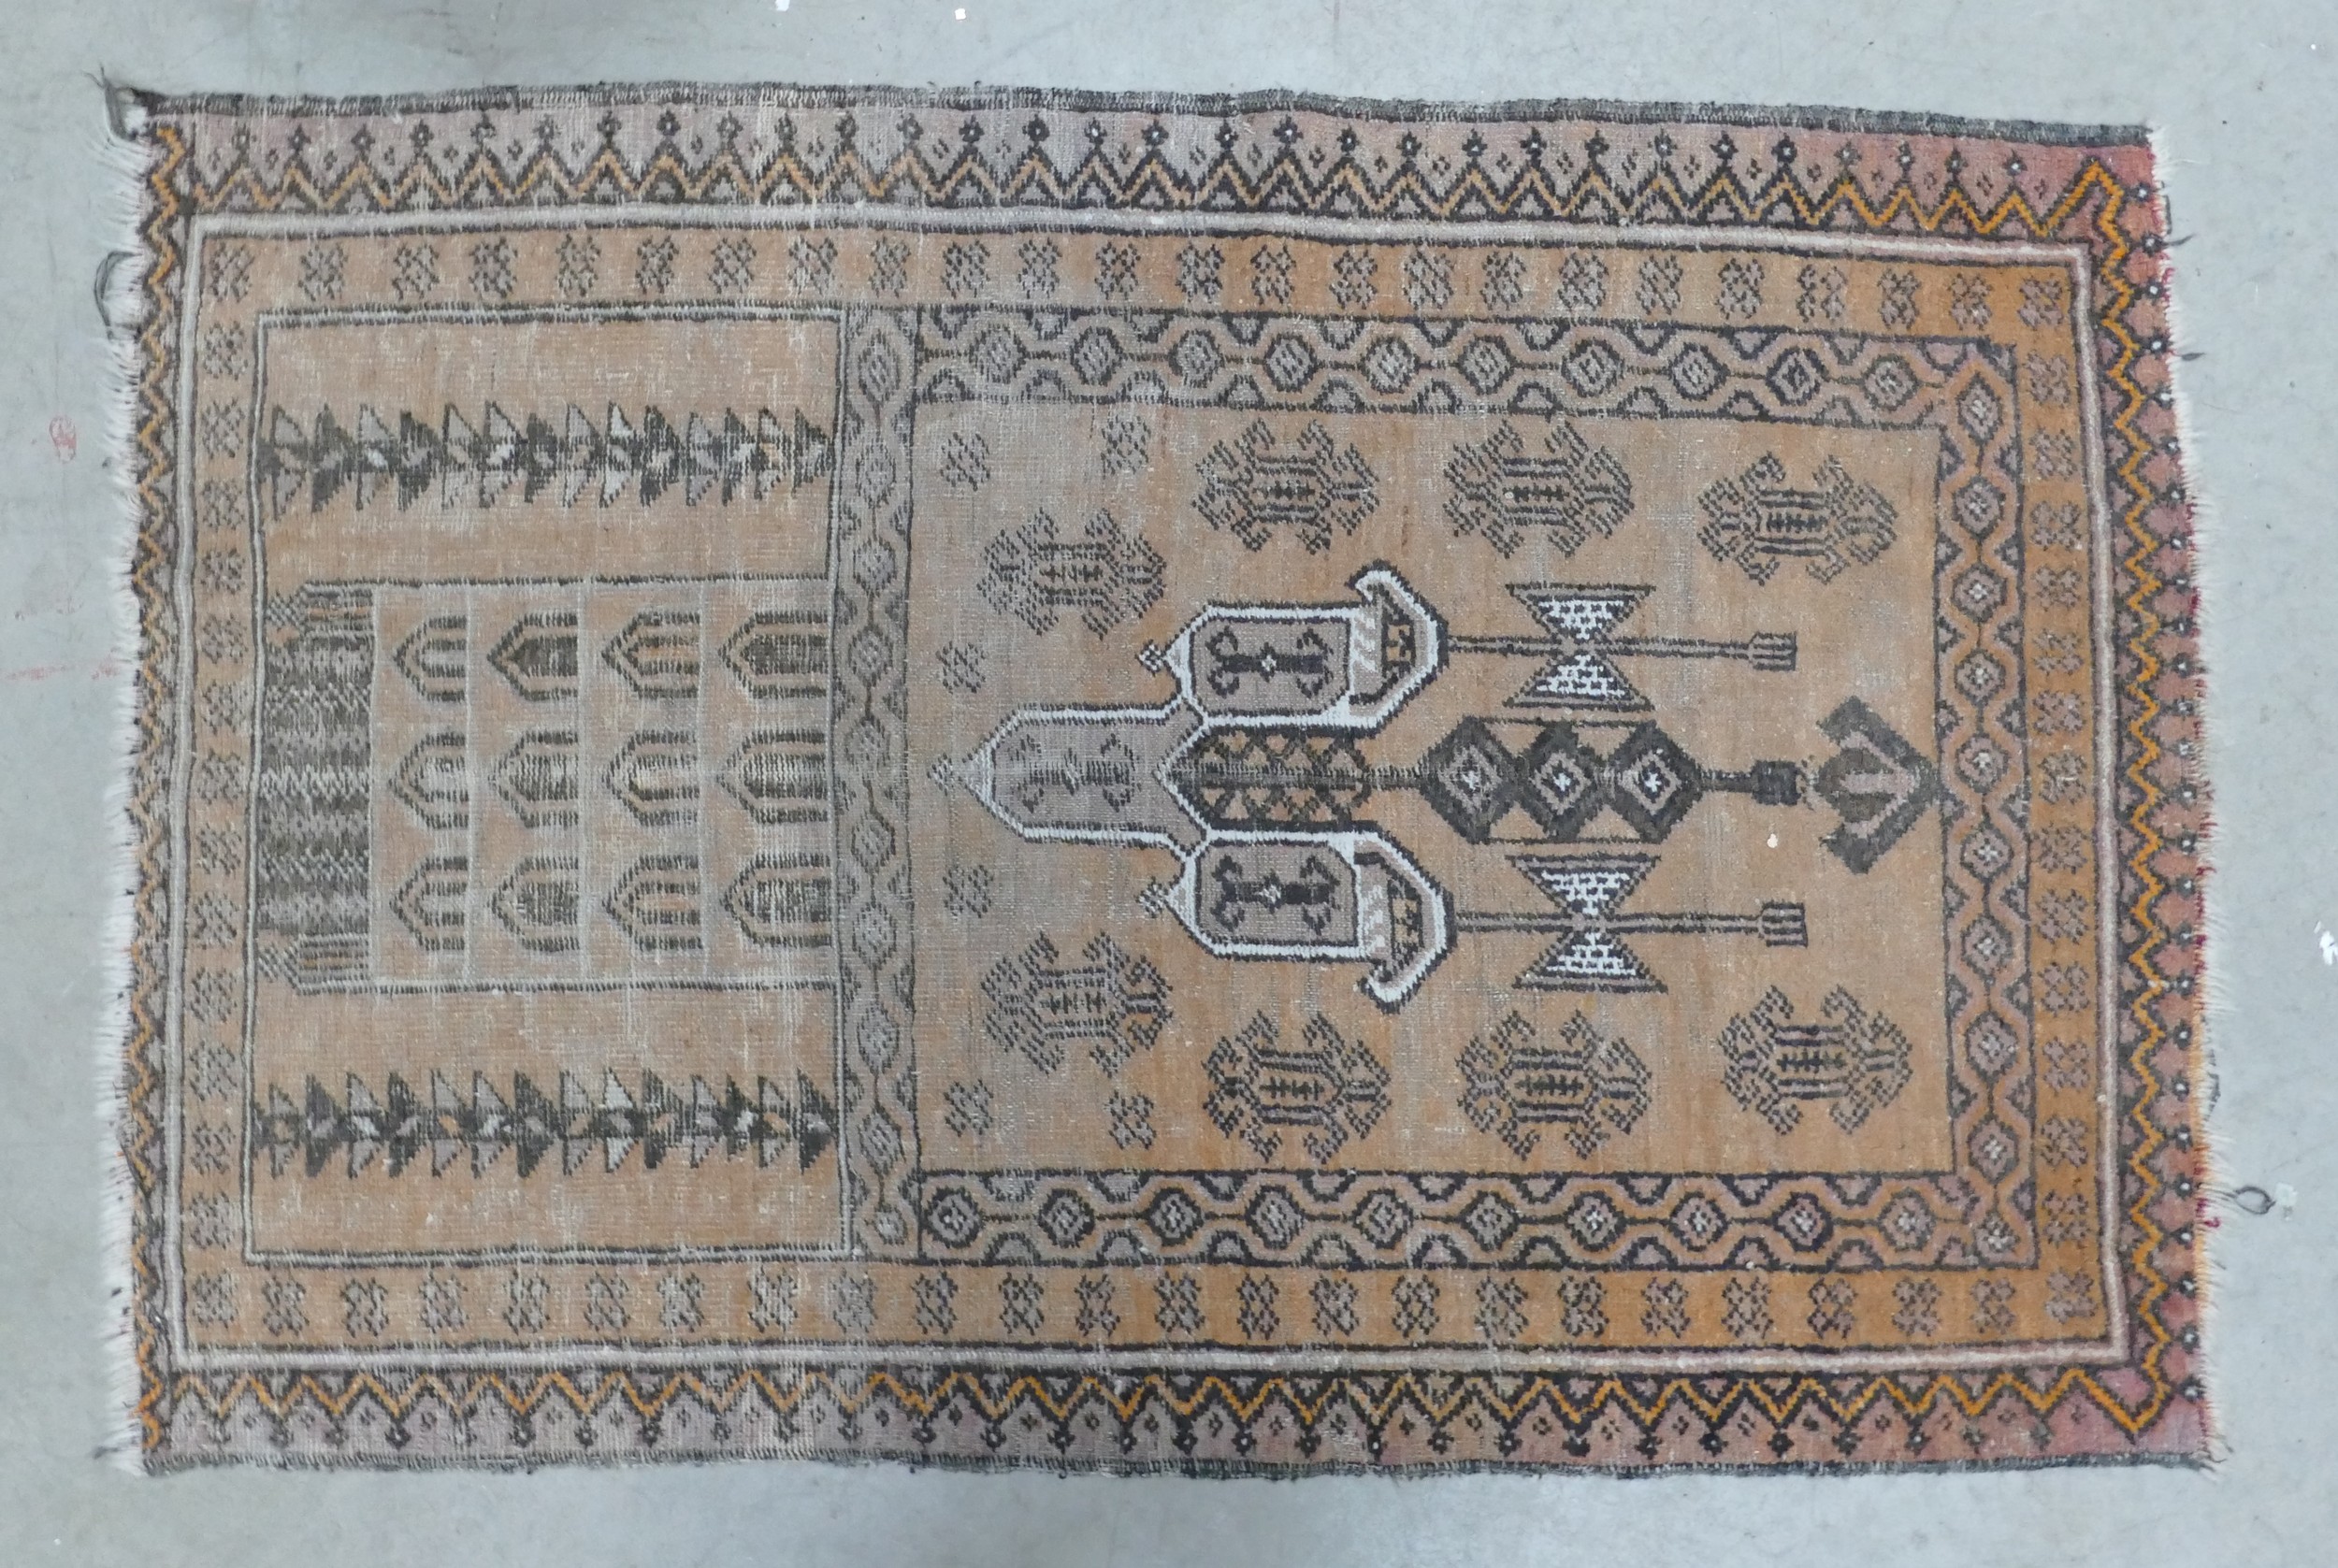 A Distressed Afghan Style Prayer Rug. Wear and fraying noted. Length: 138cm Width: 90cm